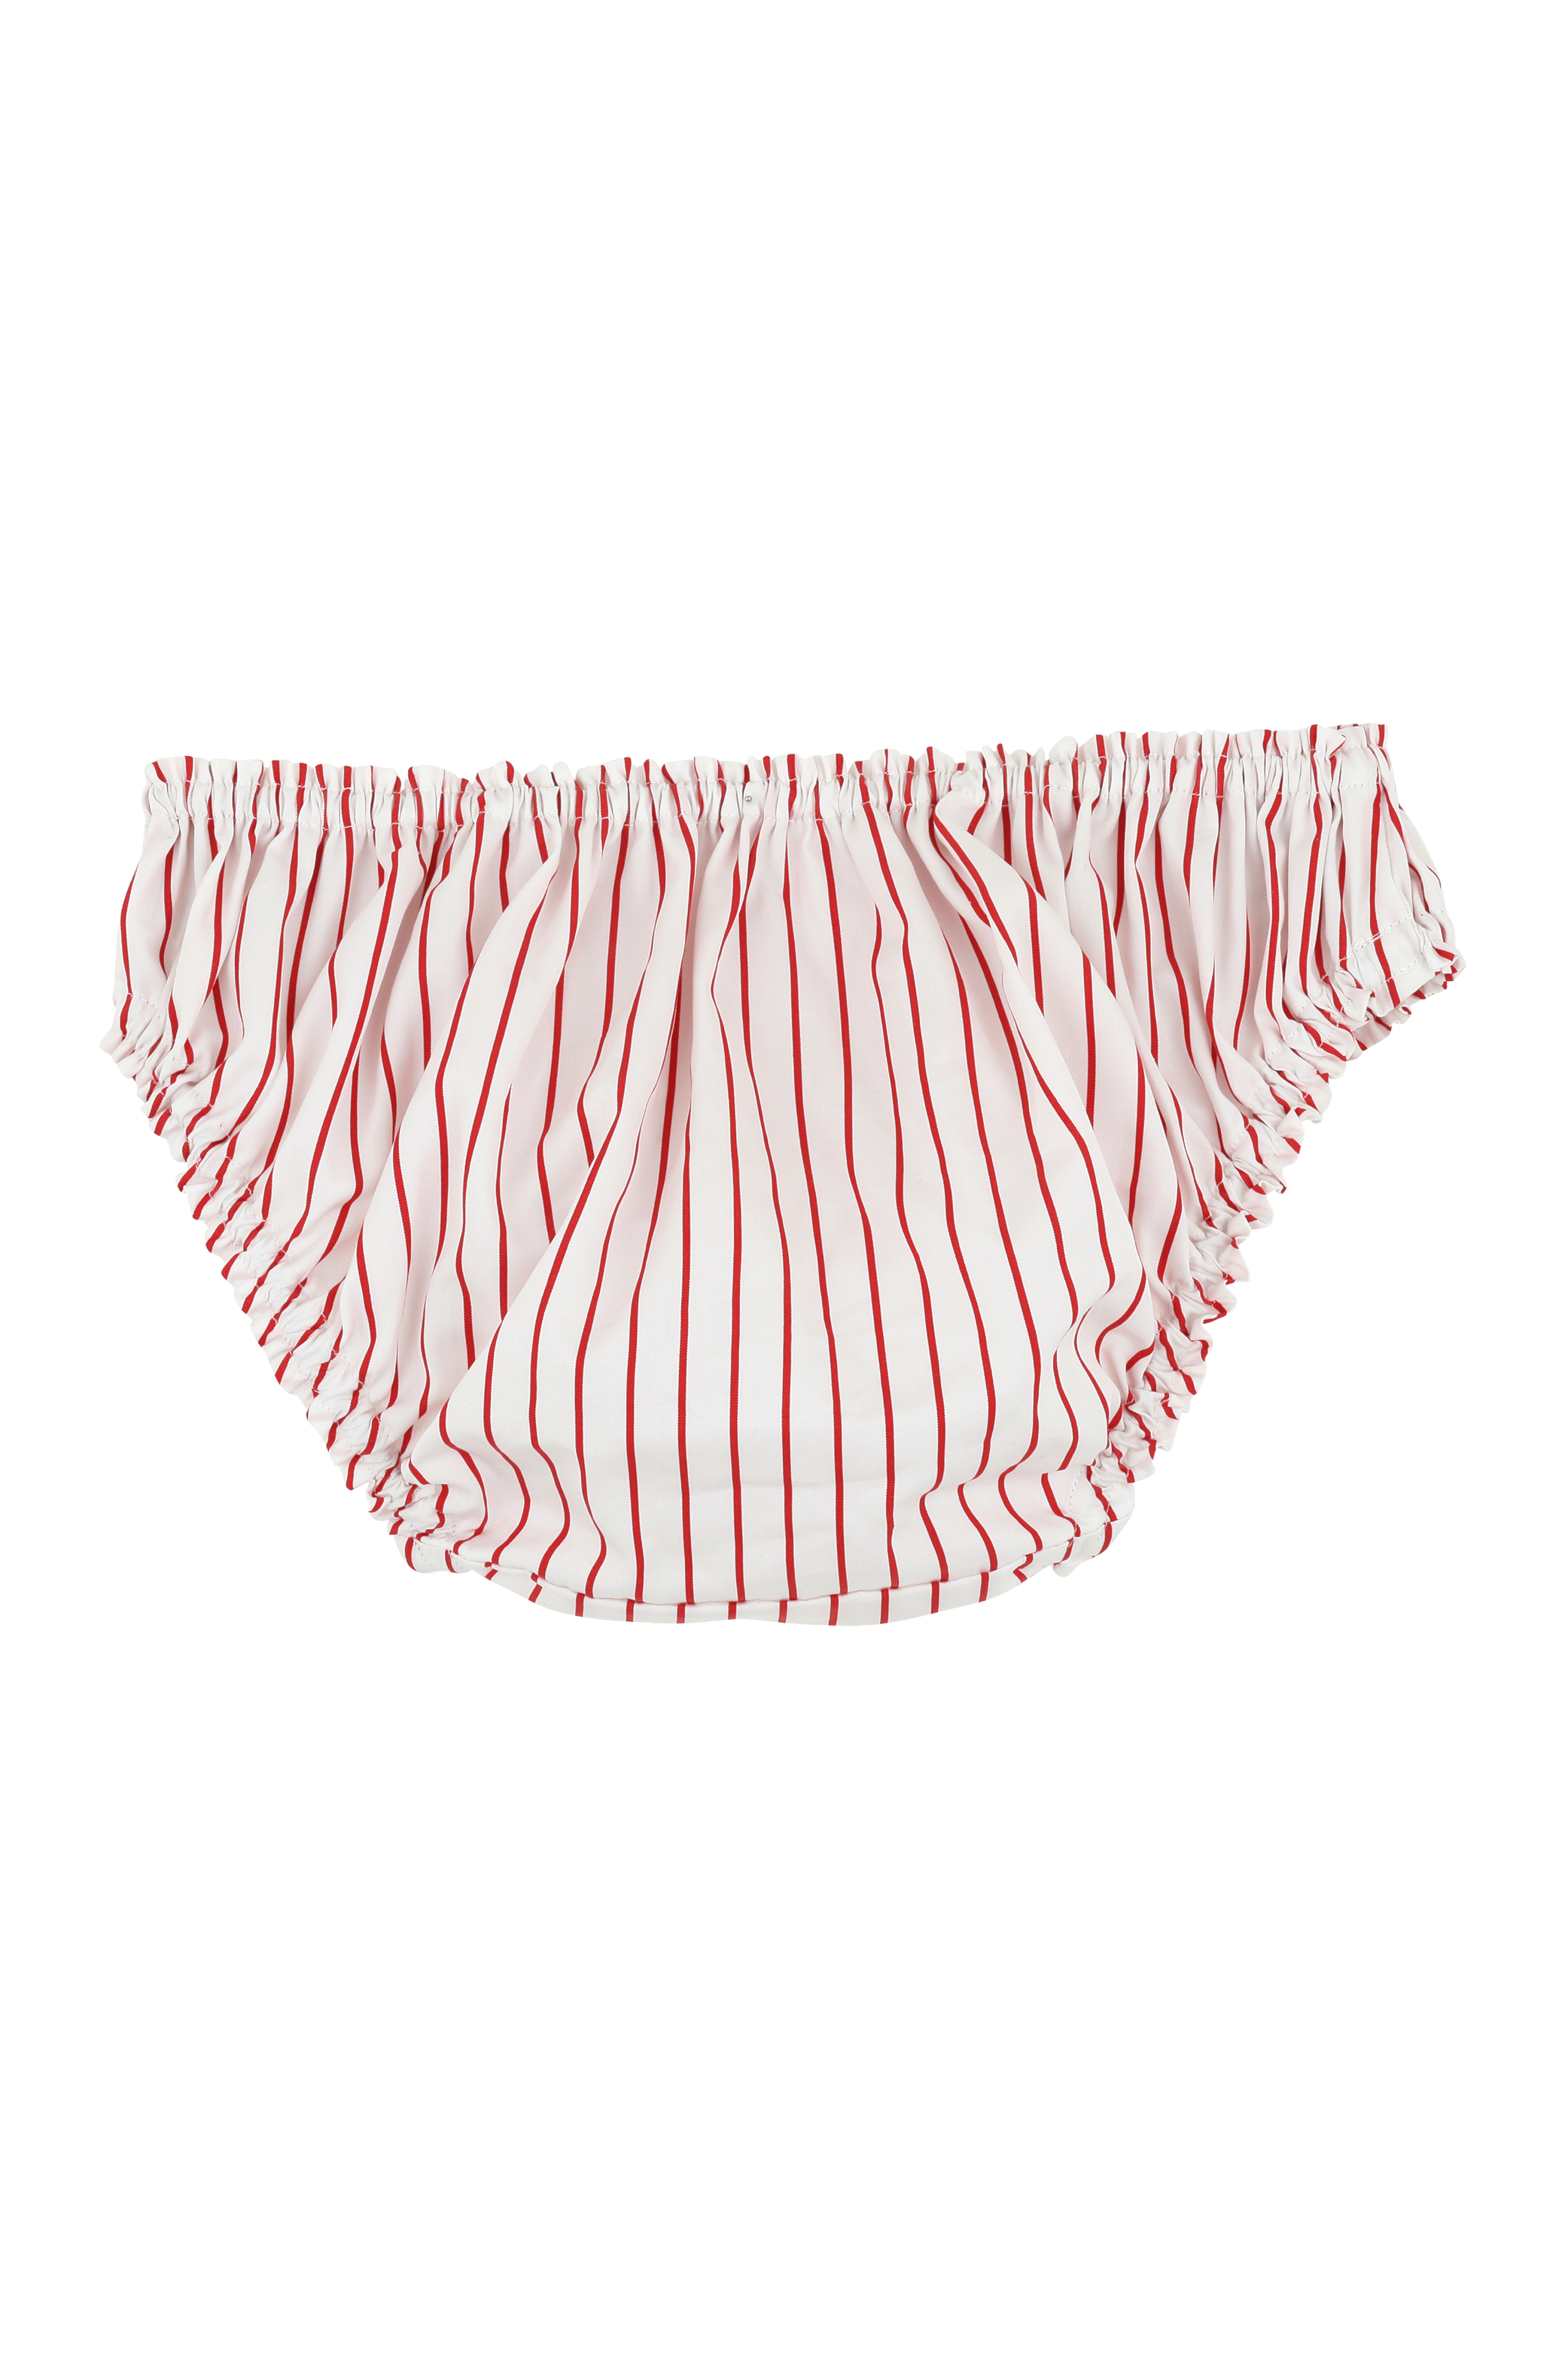 The Gina in striped red and white cotton broadcloth